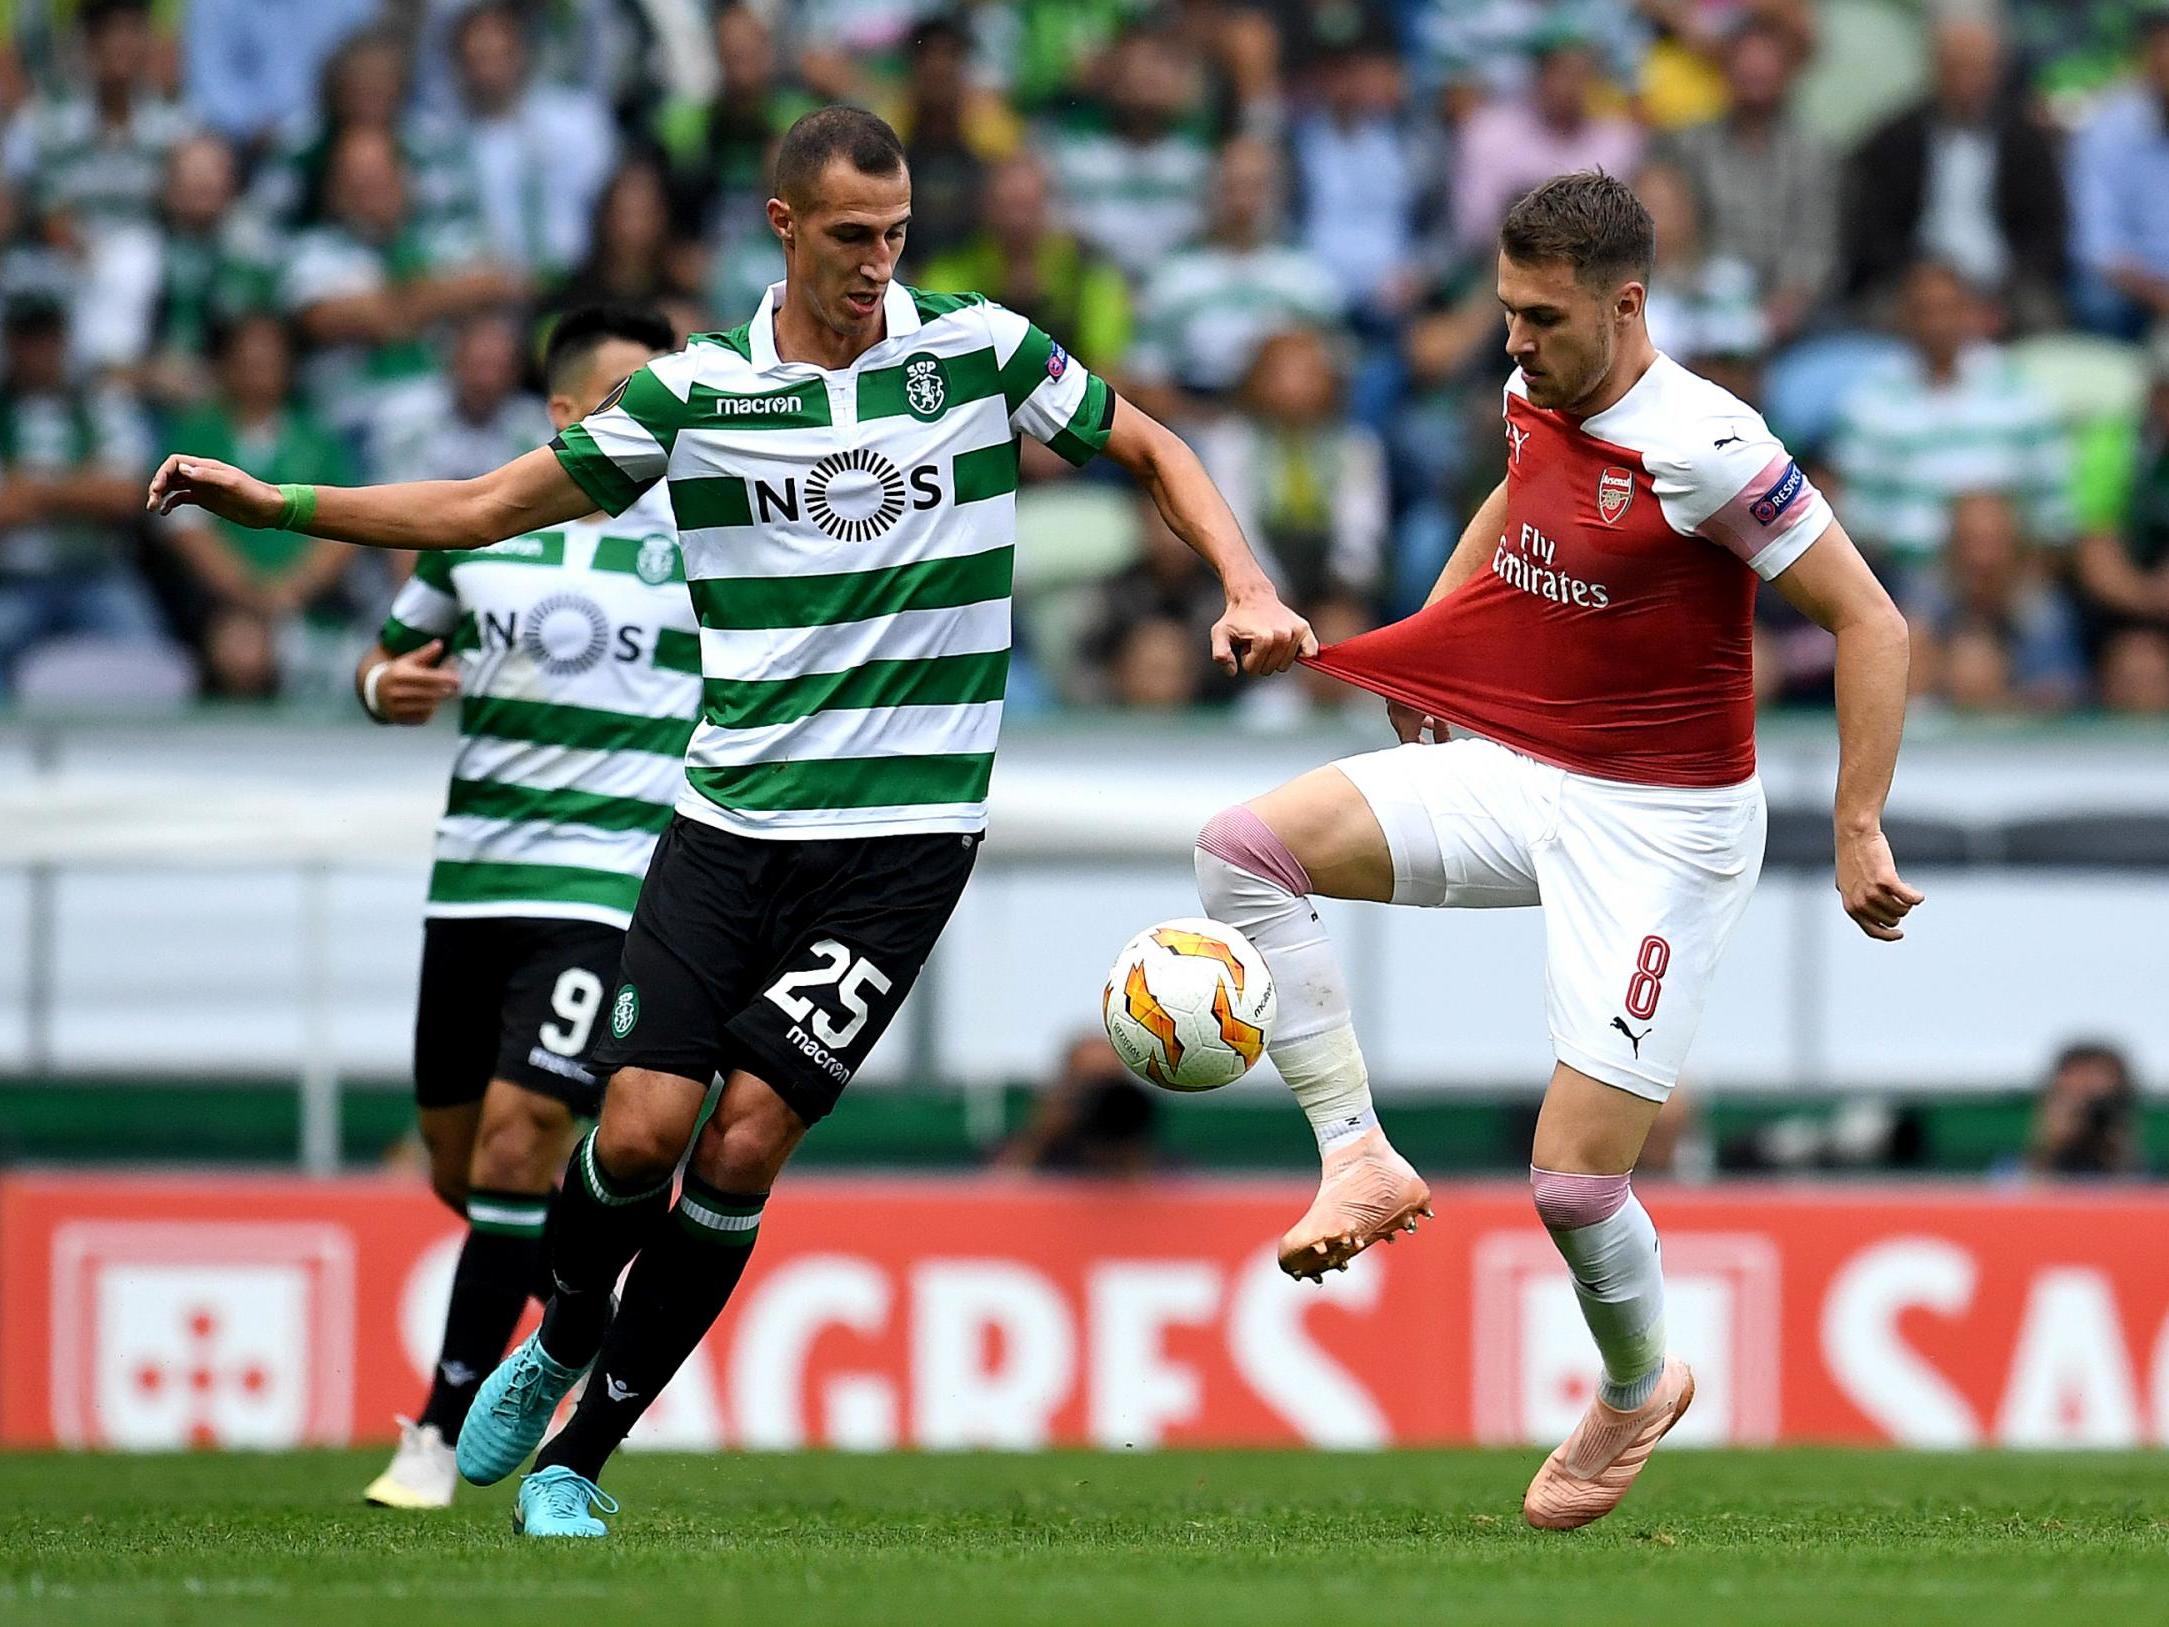 Aaron Ramsey controls the ball while under pressure from Radosav Petrovic